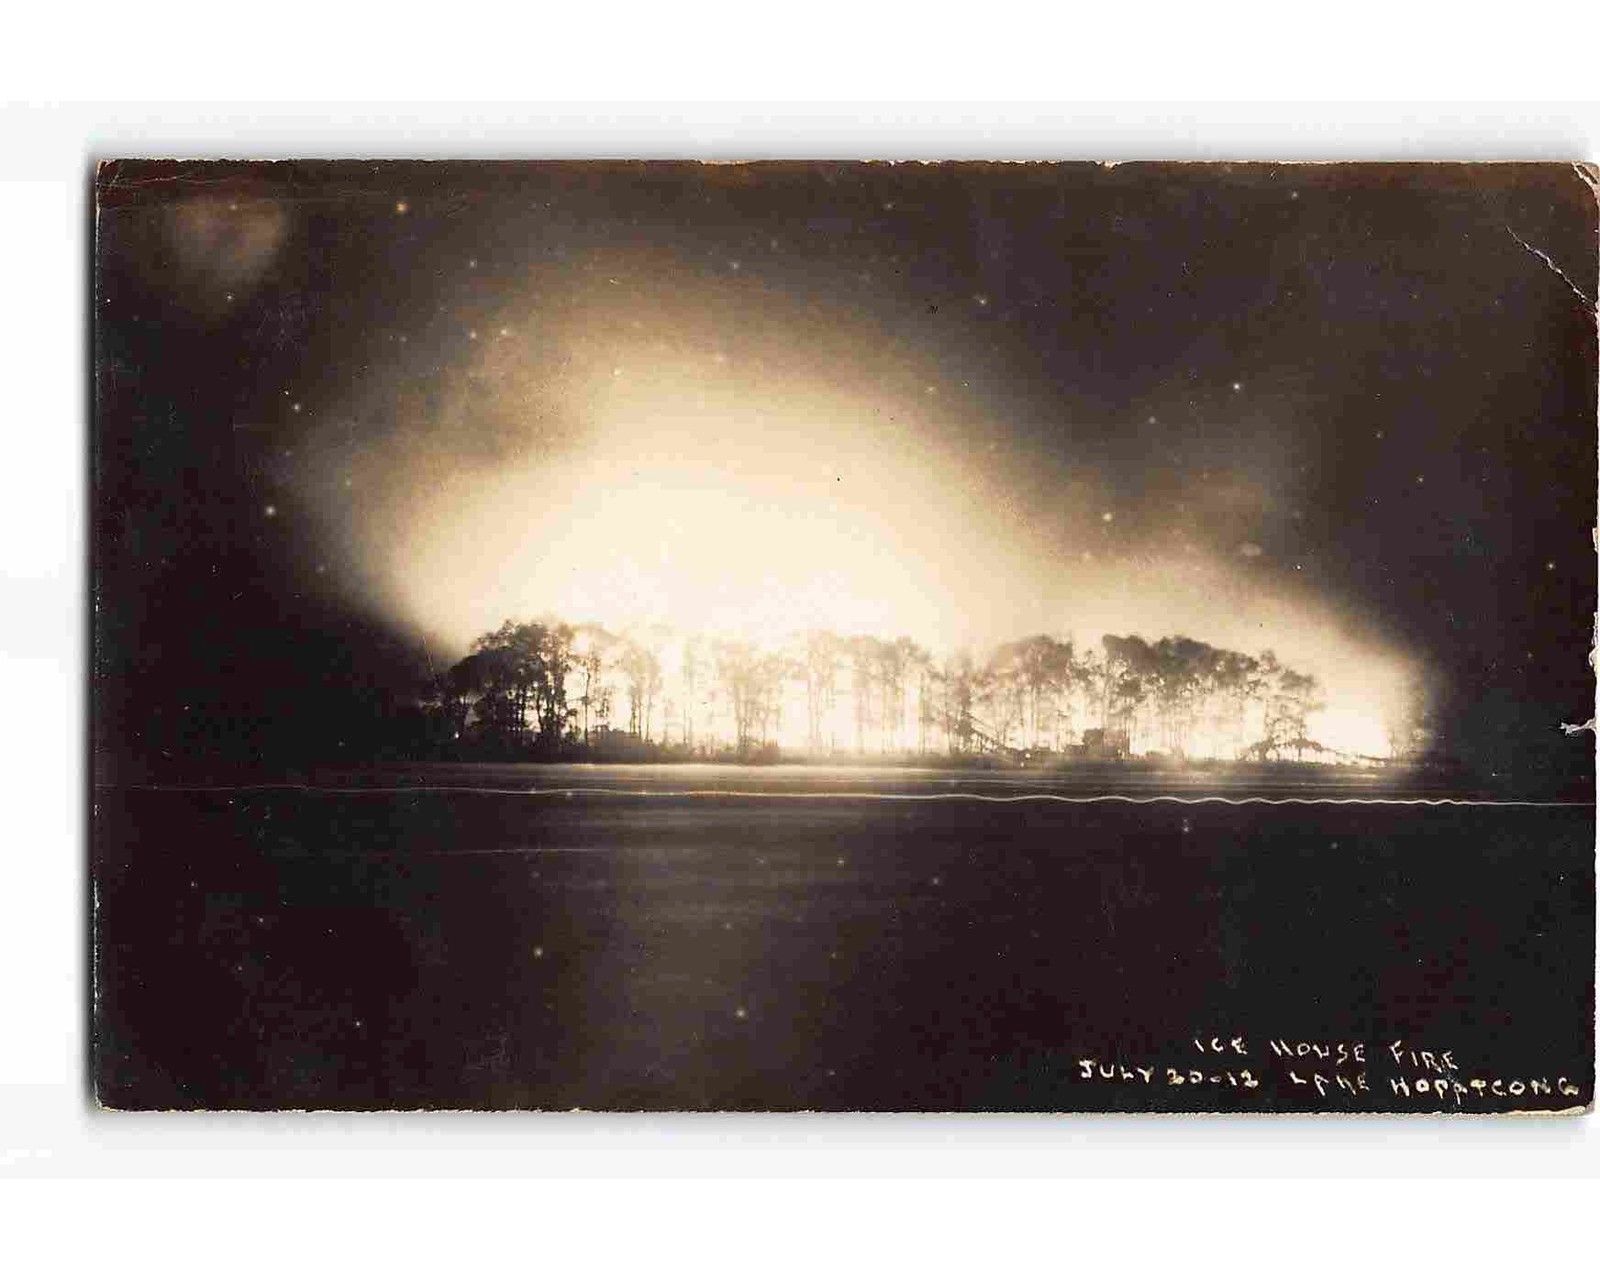 Lake Hopatcong - Actual Ice House Fire - c 1910 or so